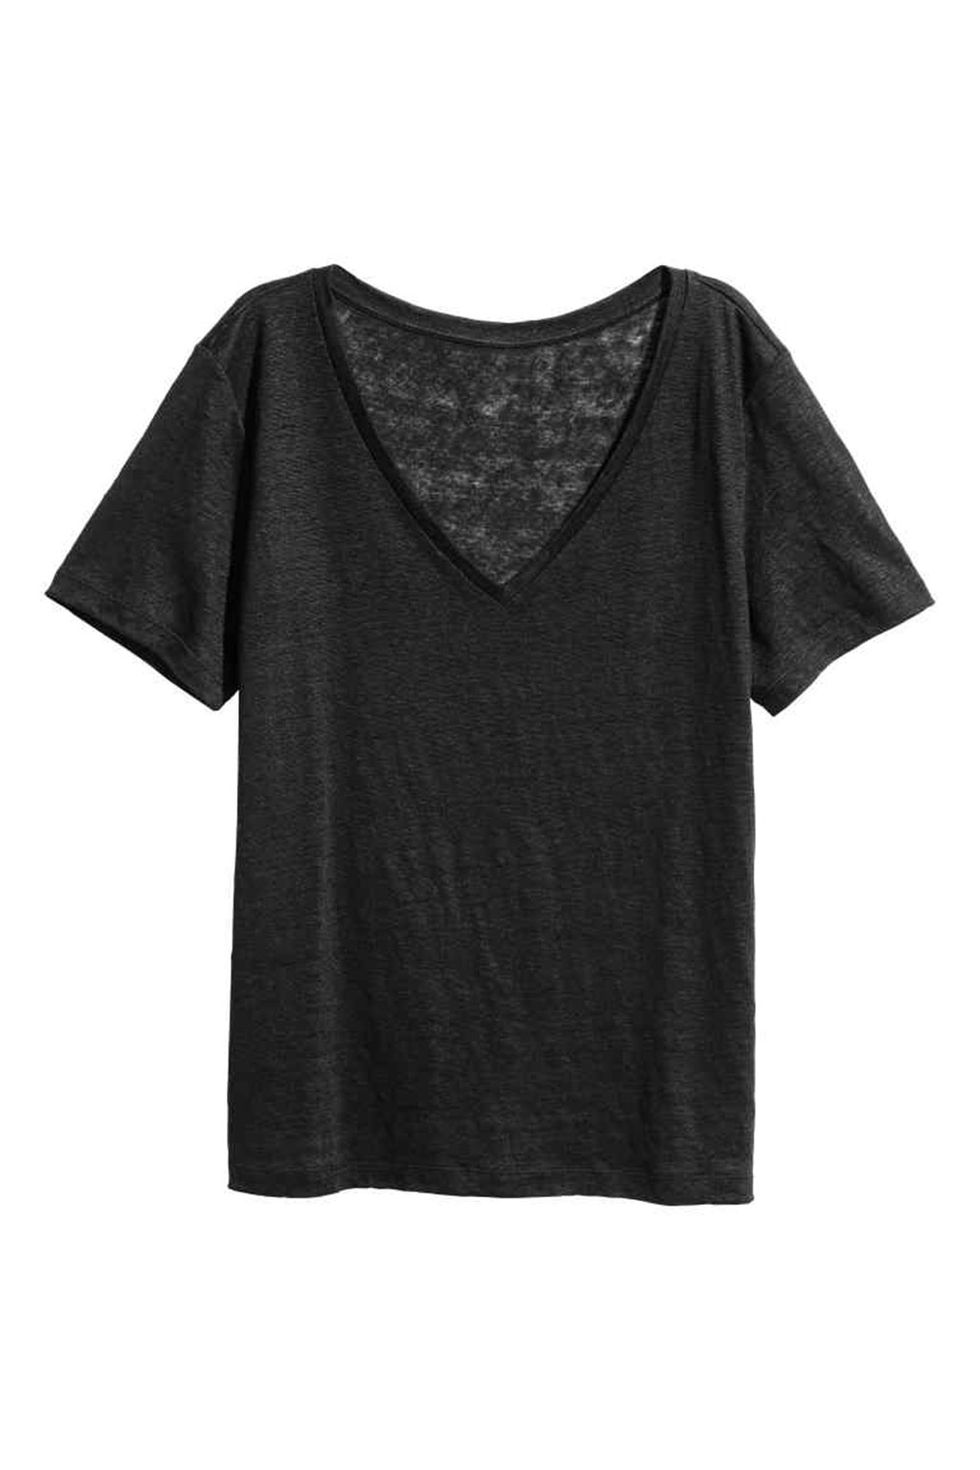 Clothing, T-shirt, Black, Sleeve, Crop top, Blouse, Neck, Top, 